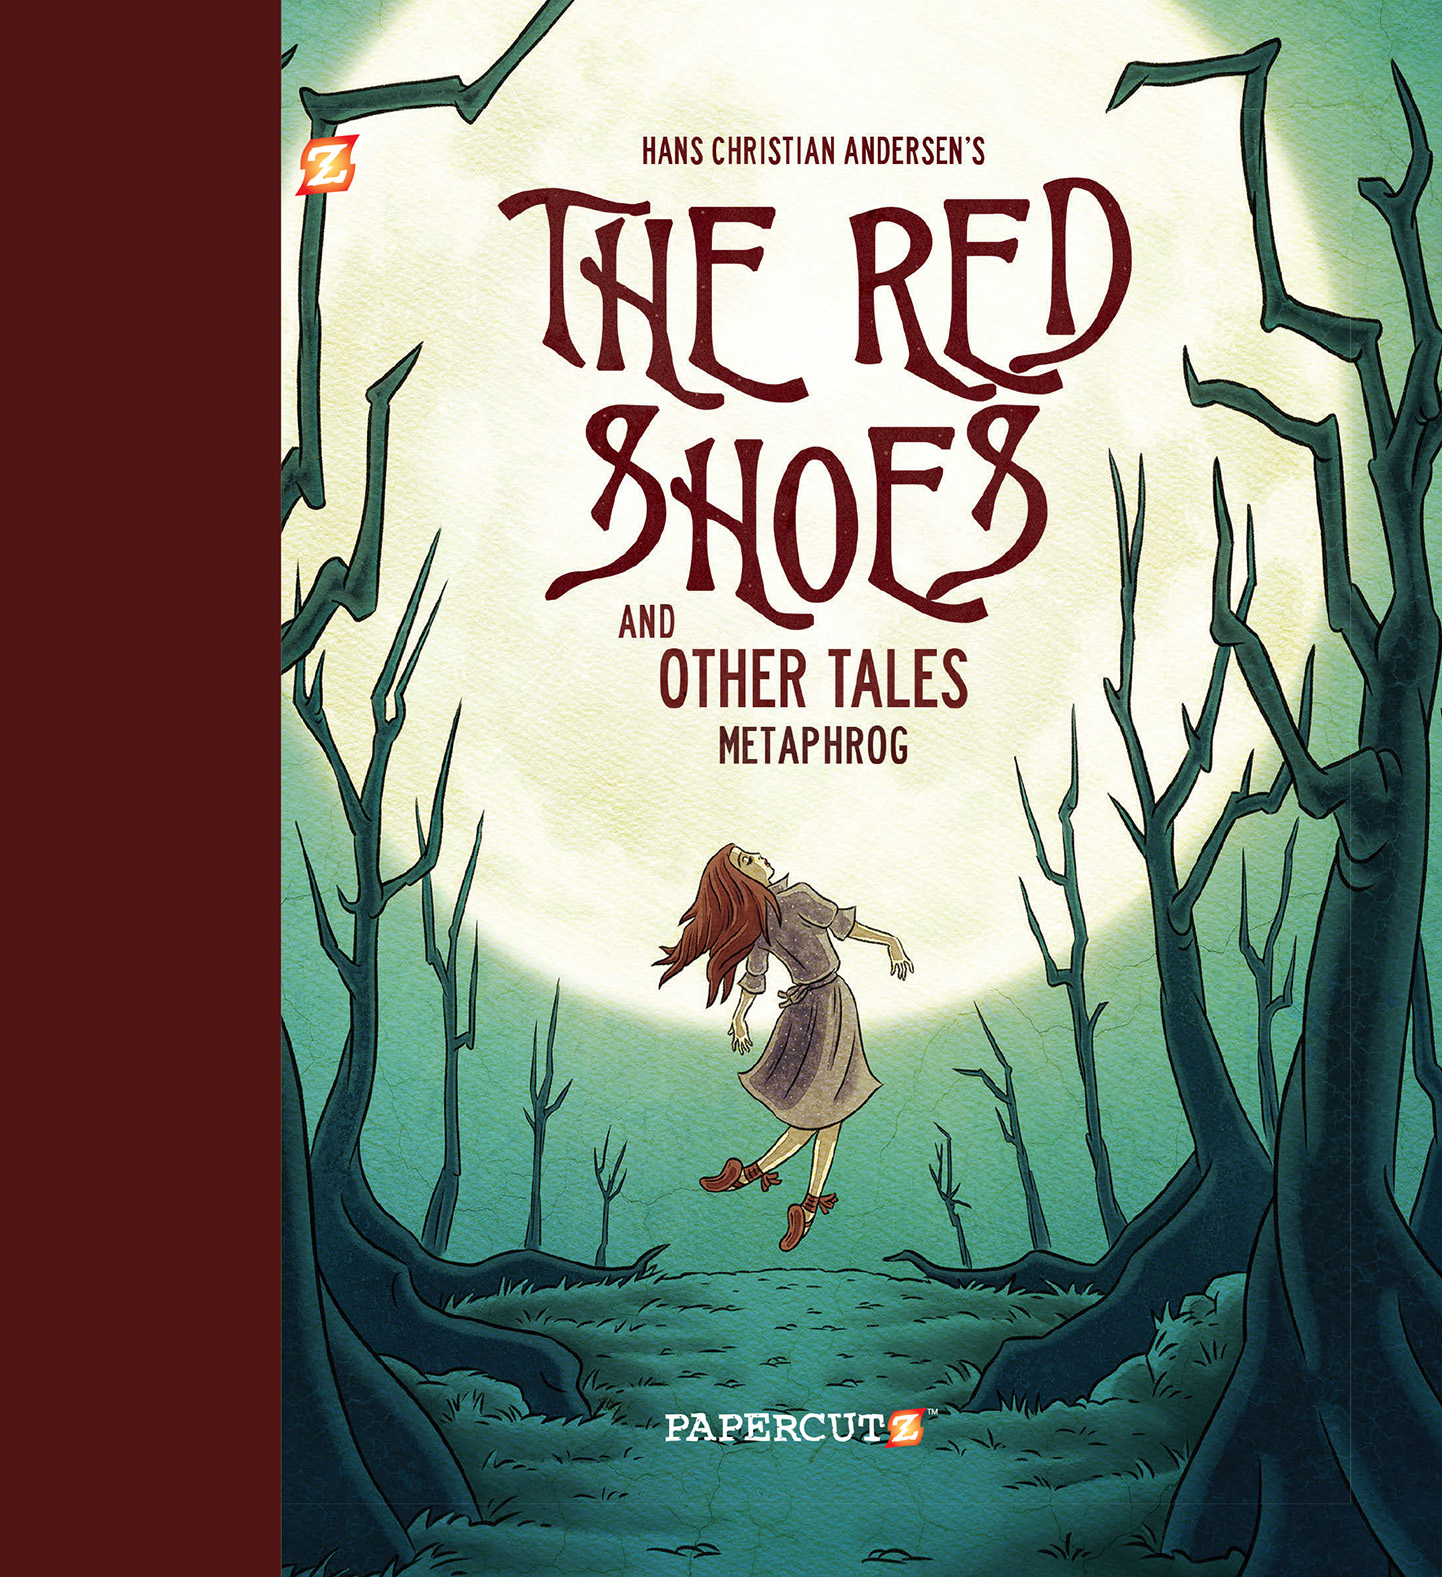 Read online The Red Shoes and Other Tales comic -  Issue # Full - 1